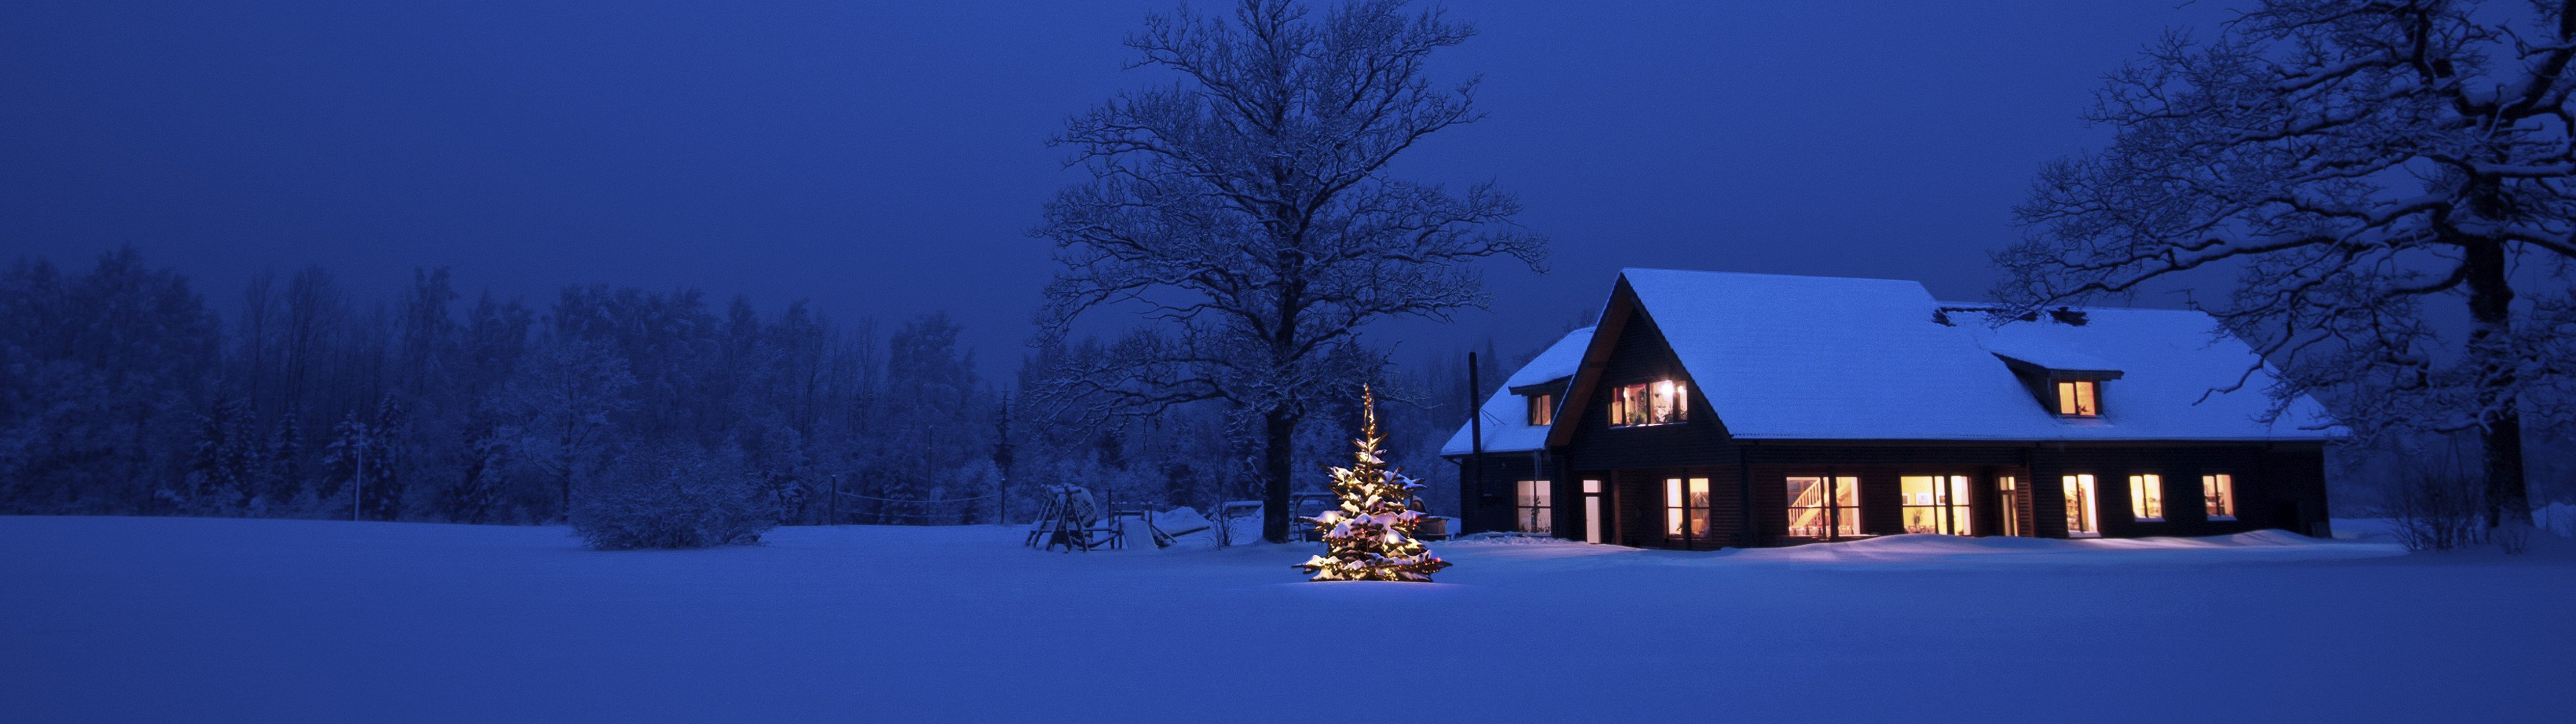 Christmas Tree And Cozy House With Snow Outside 4k Wallpaper